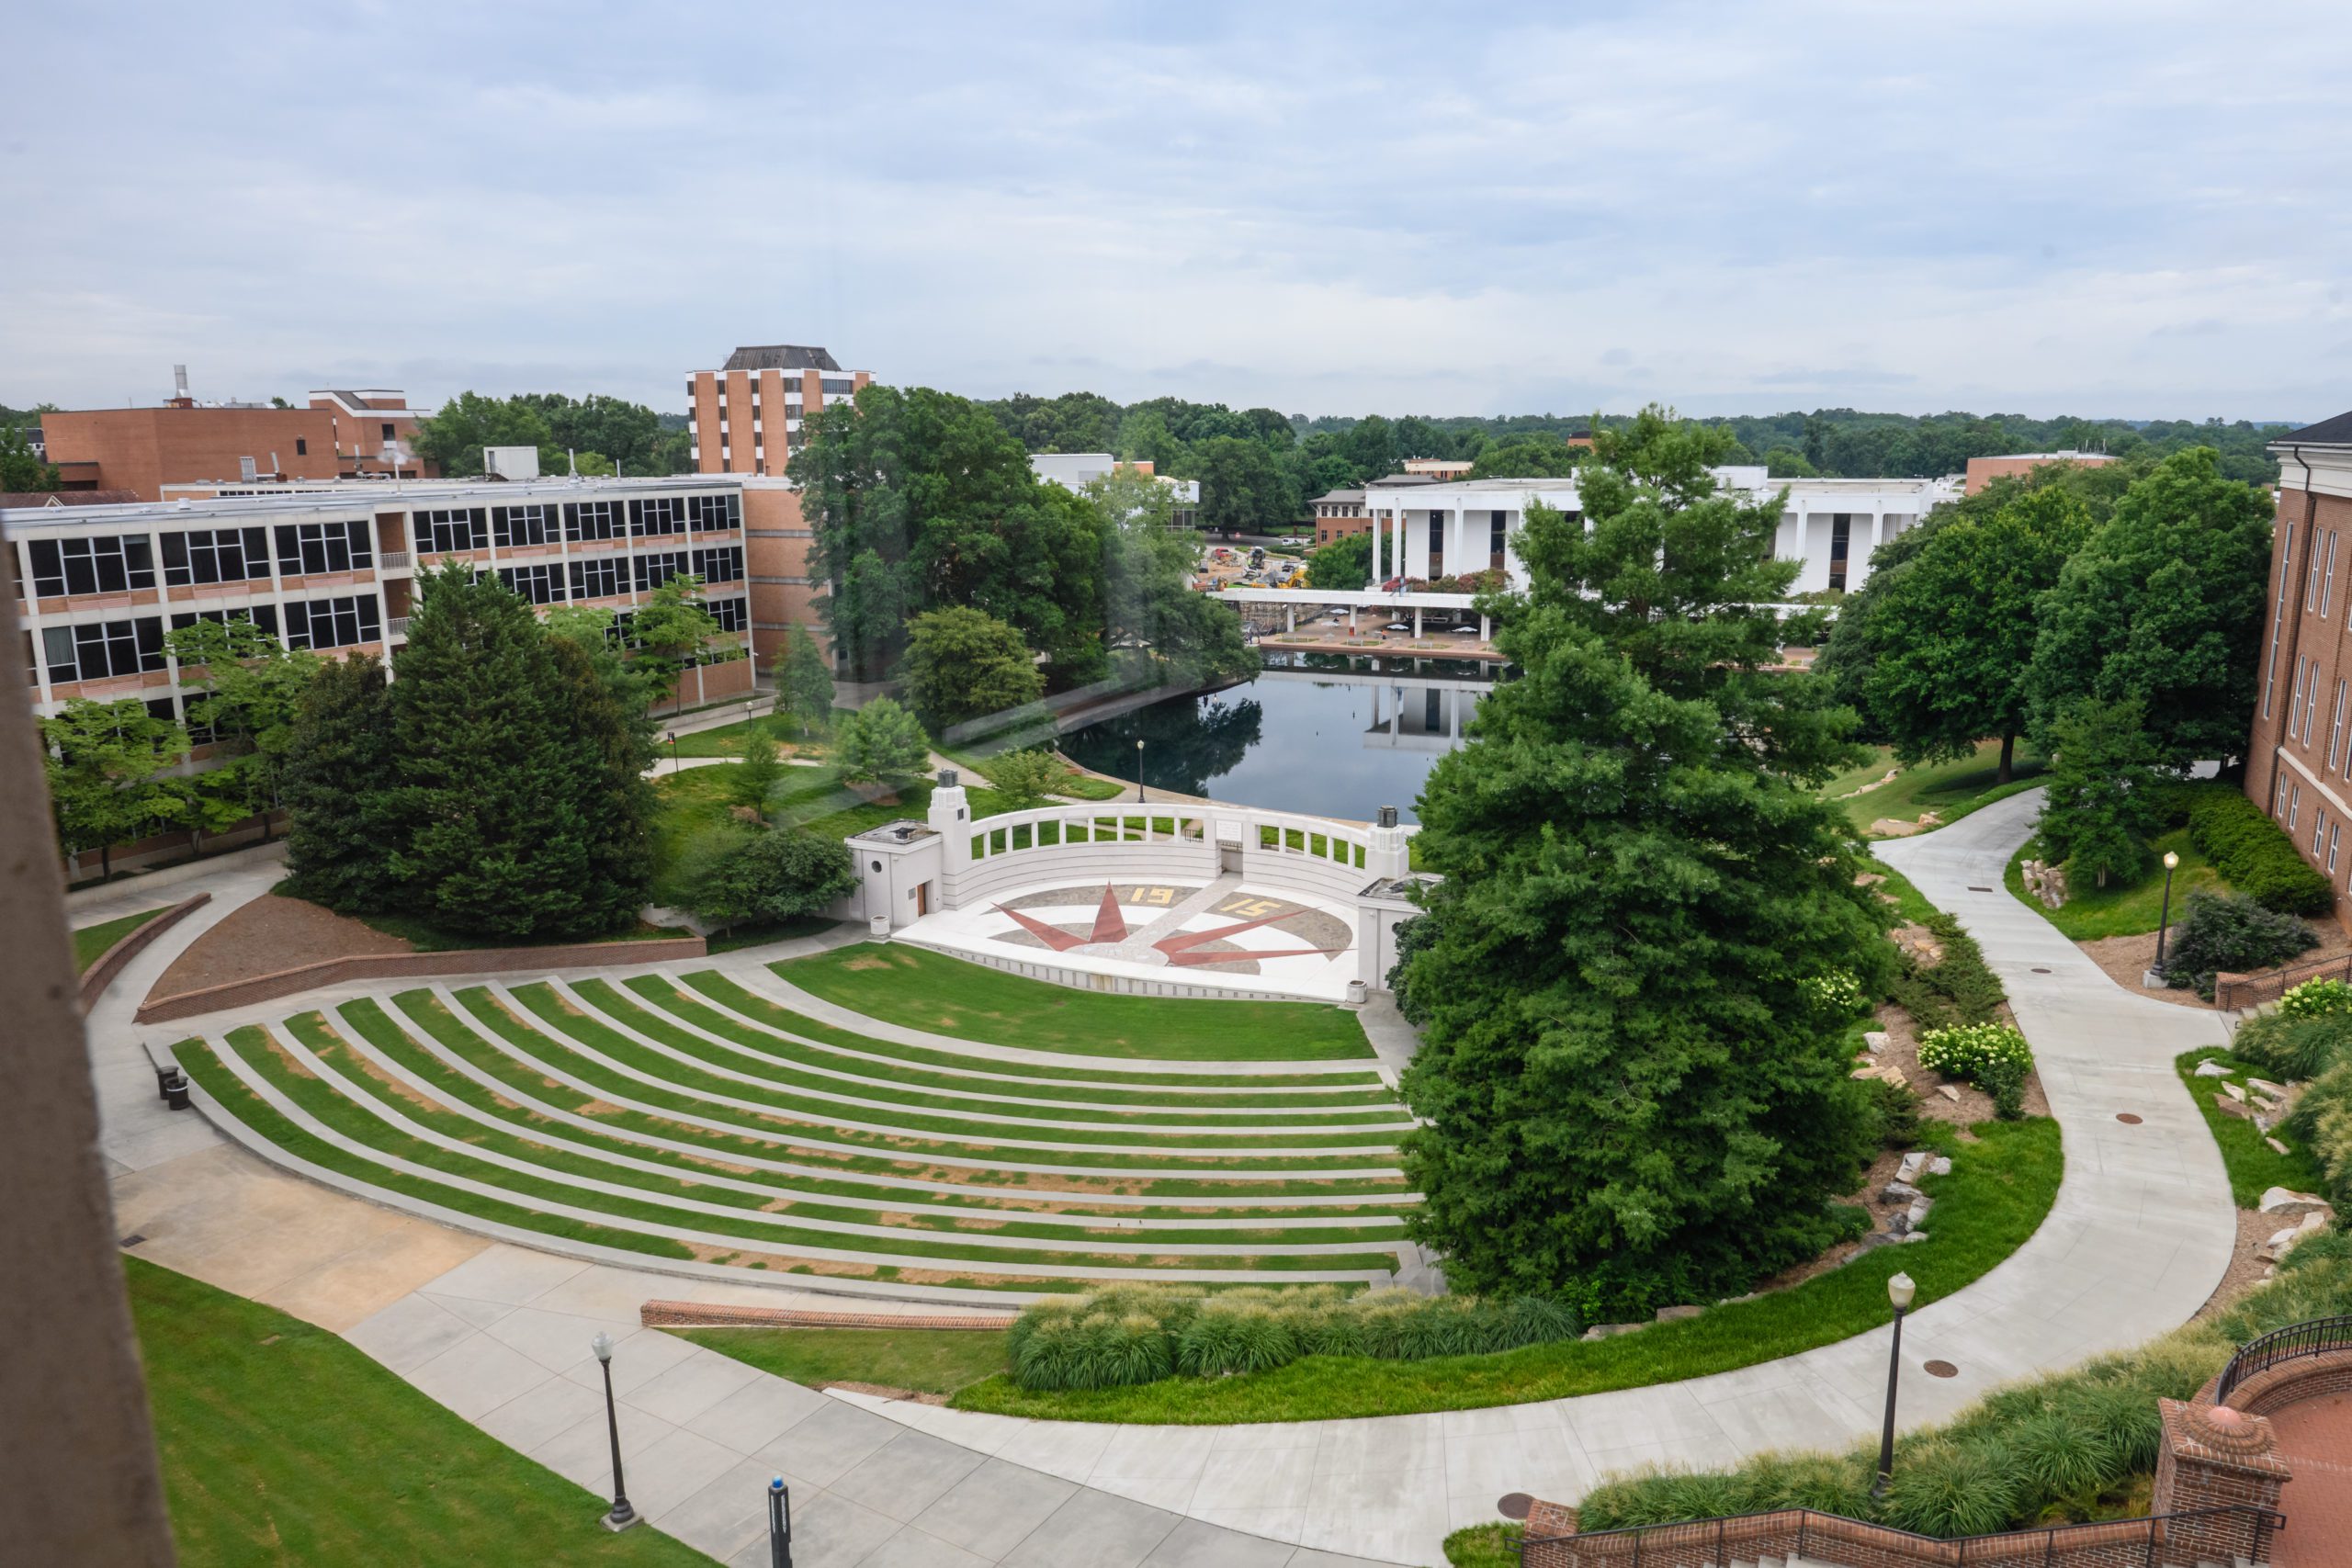 Aerial shot of Clemson's campus showing the amphitheater